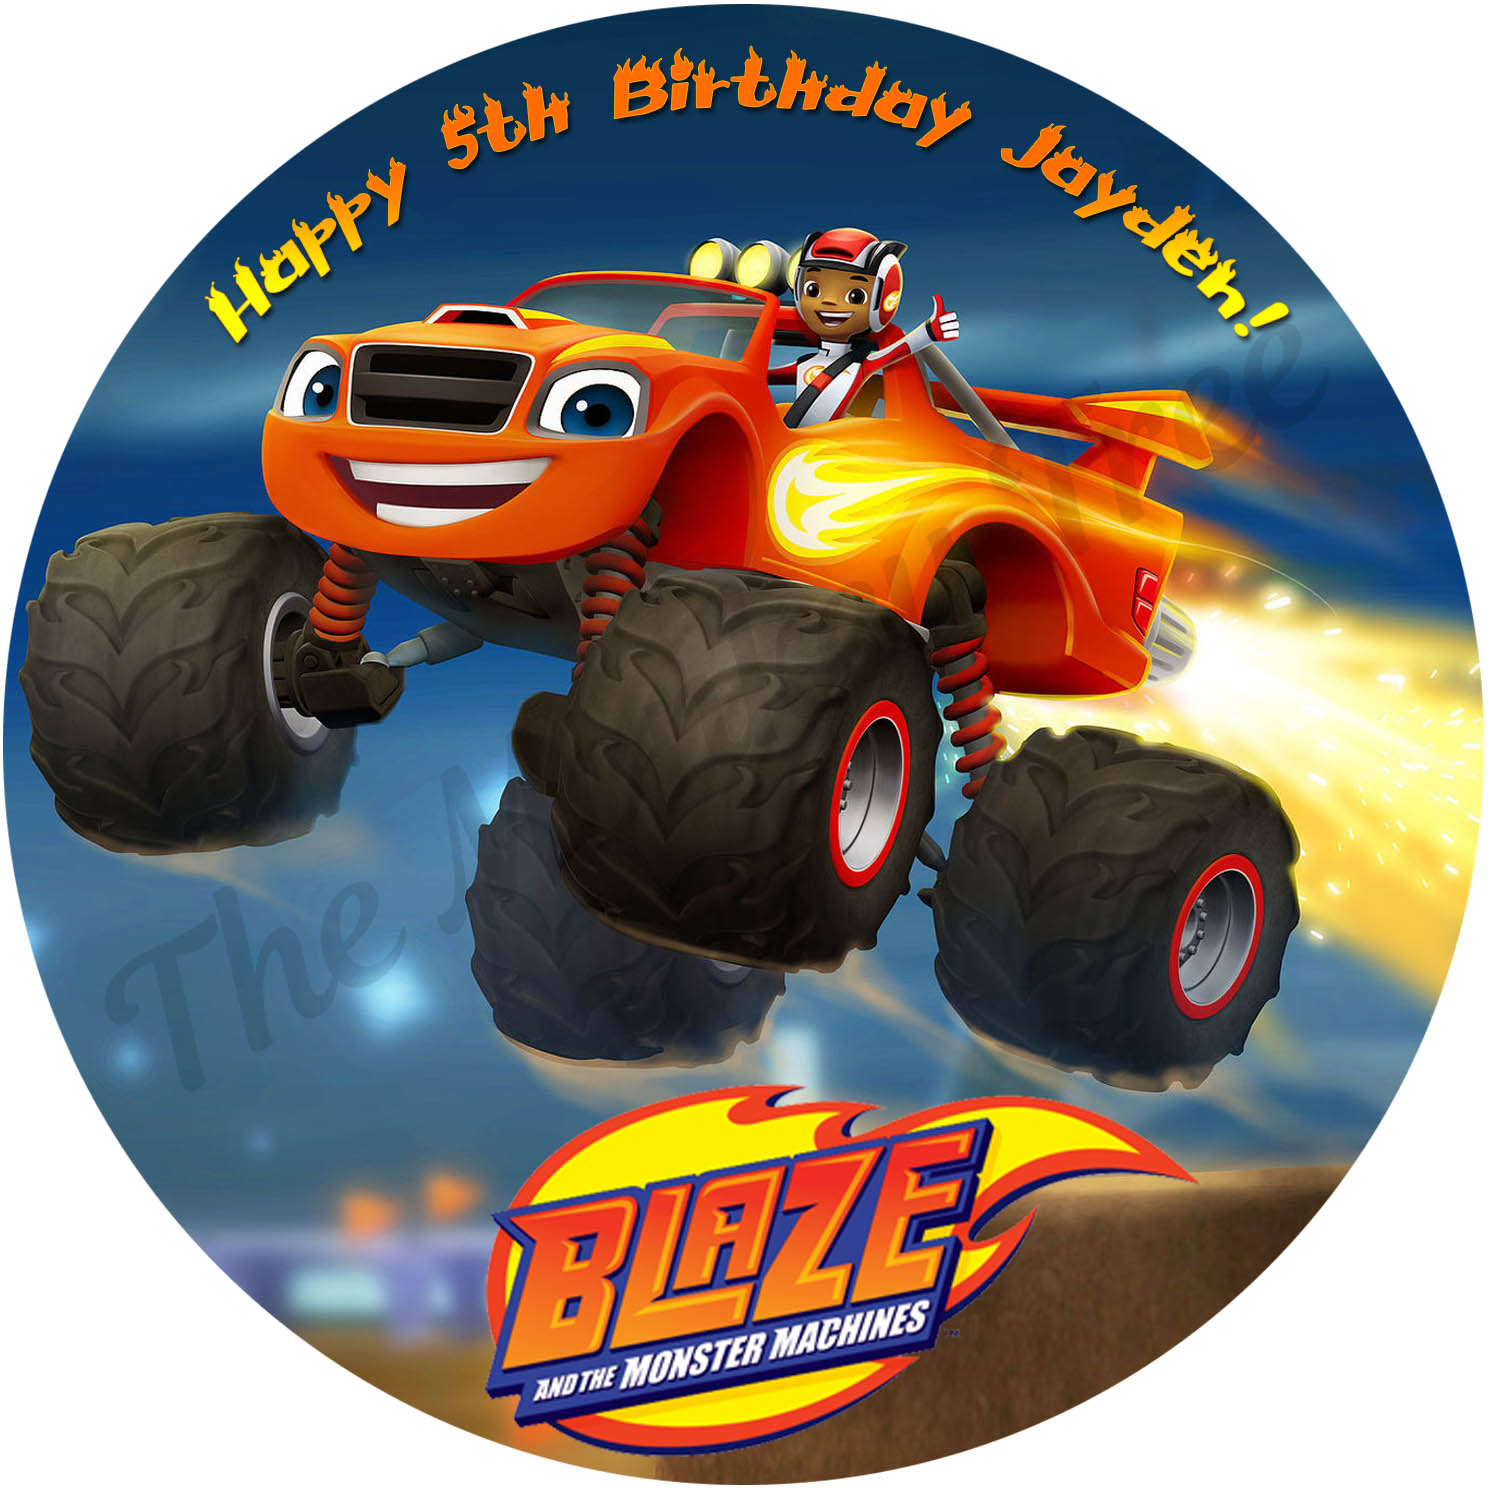 Blaze and the Monster Machines Edible Image 2 - can be personalised ...